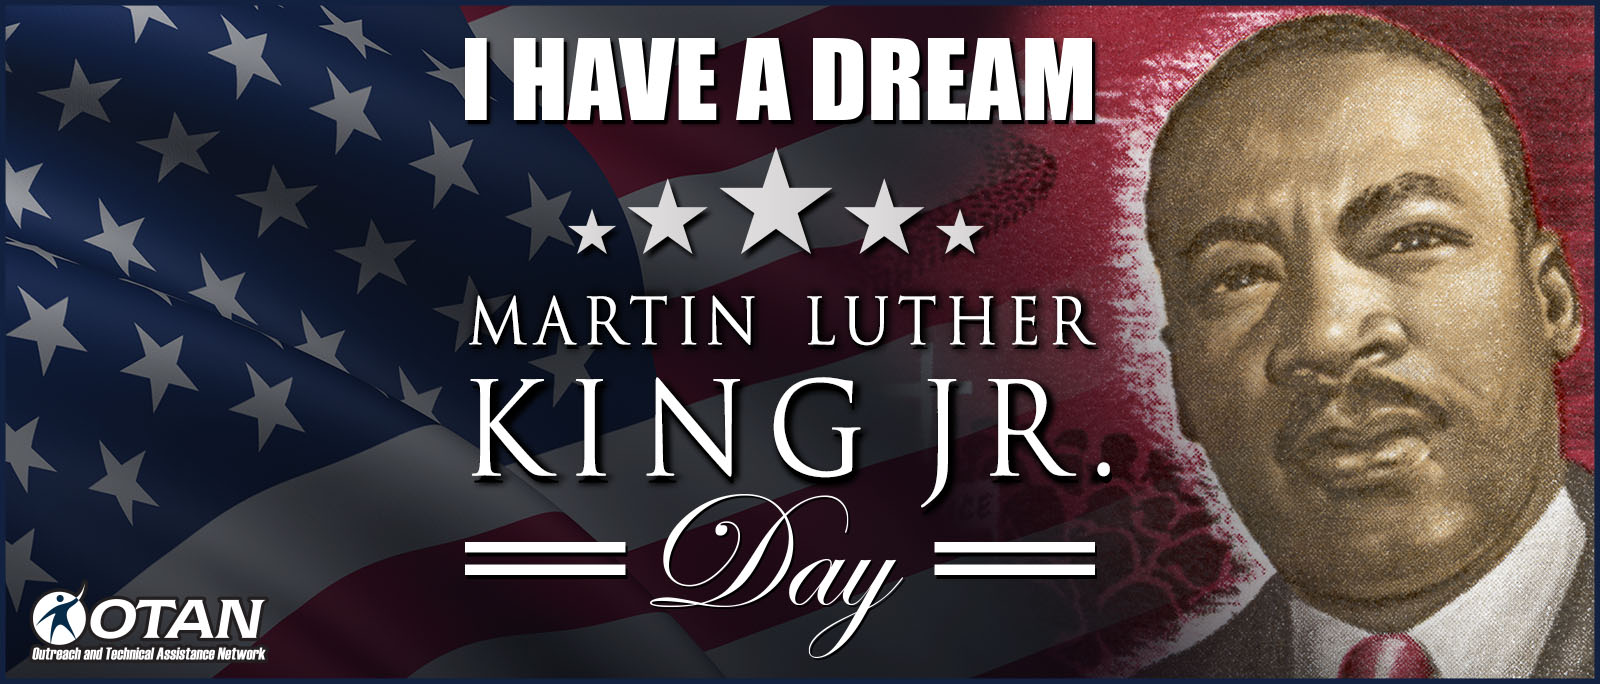 I have a dream Martin Luther King Jr. Day with American Flag in the background